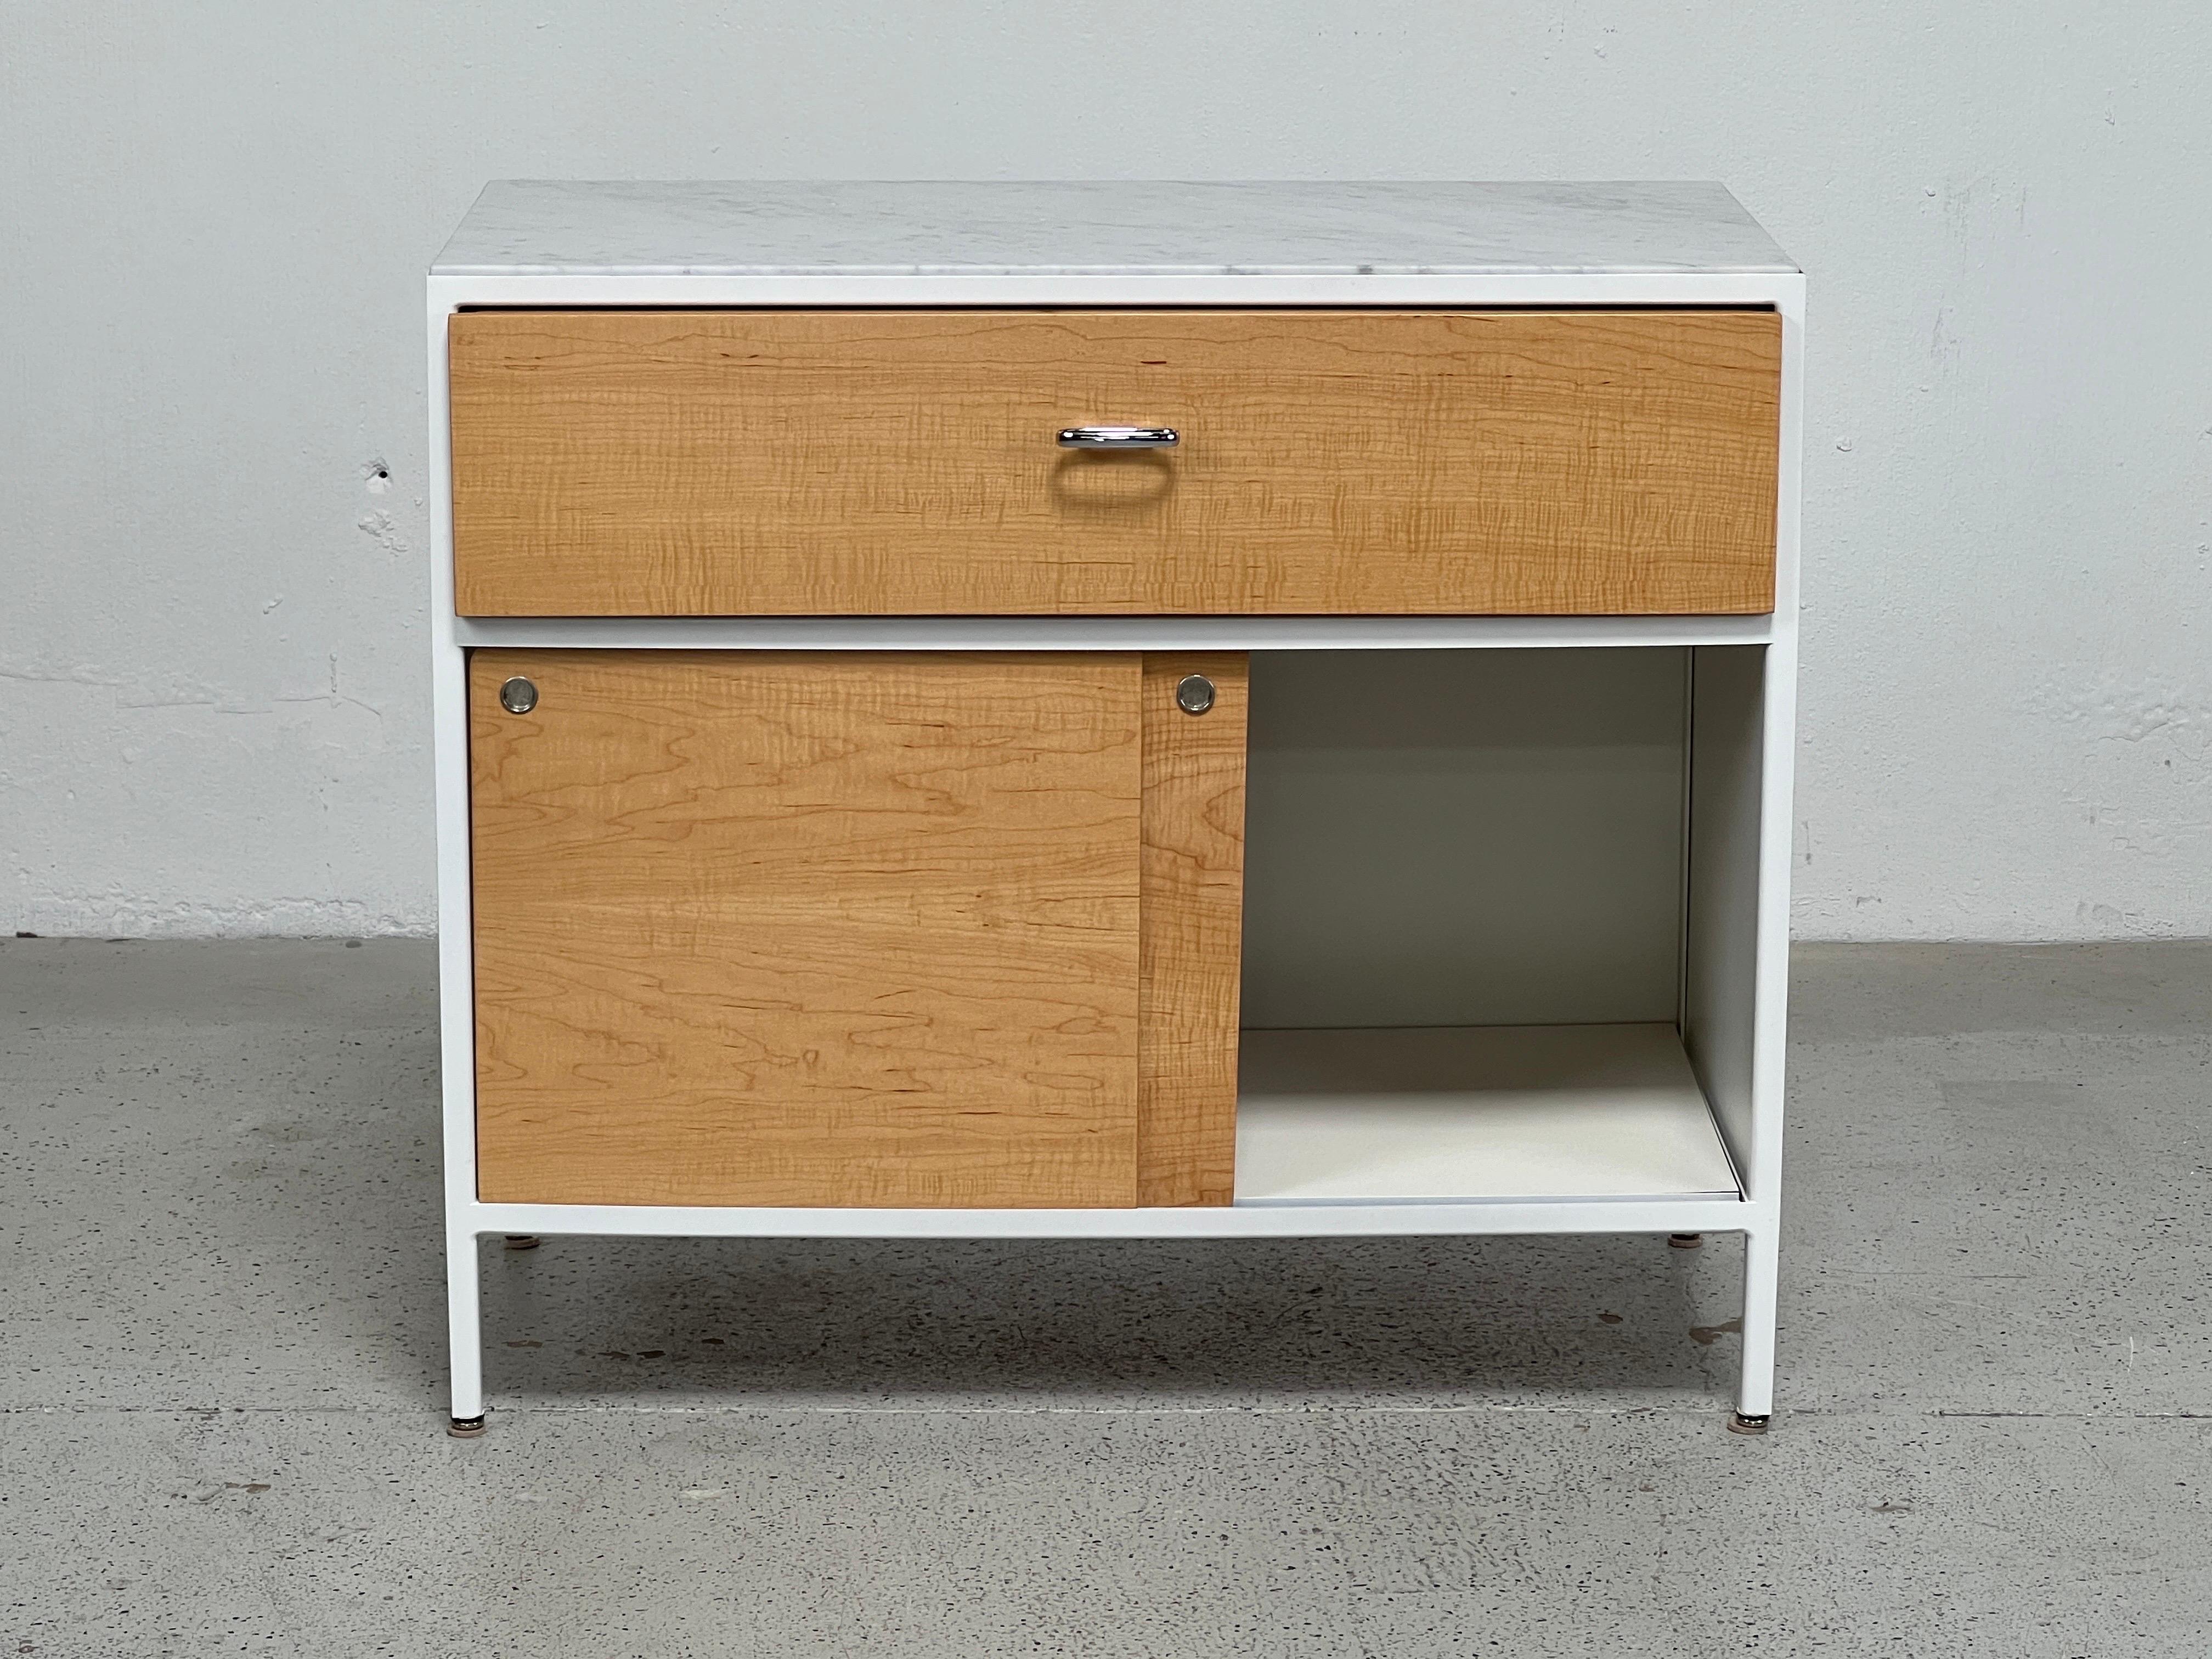 A beautiful steel frame cabinet designed by George Nelson for Herman Miller. All cabinets restored with maple drawer fronts and marble tops. Matching pair of dressers available separately. 